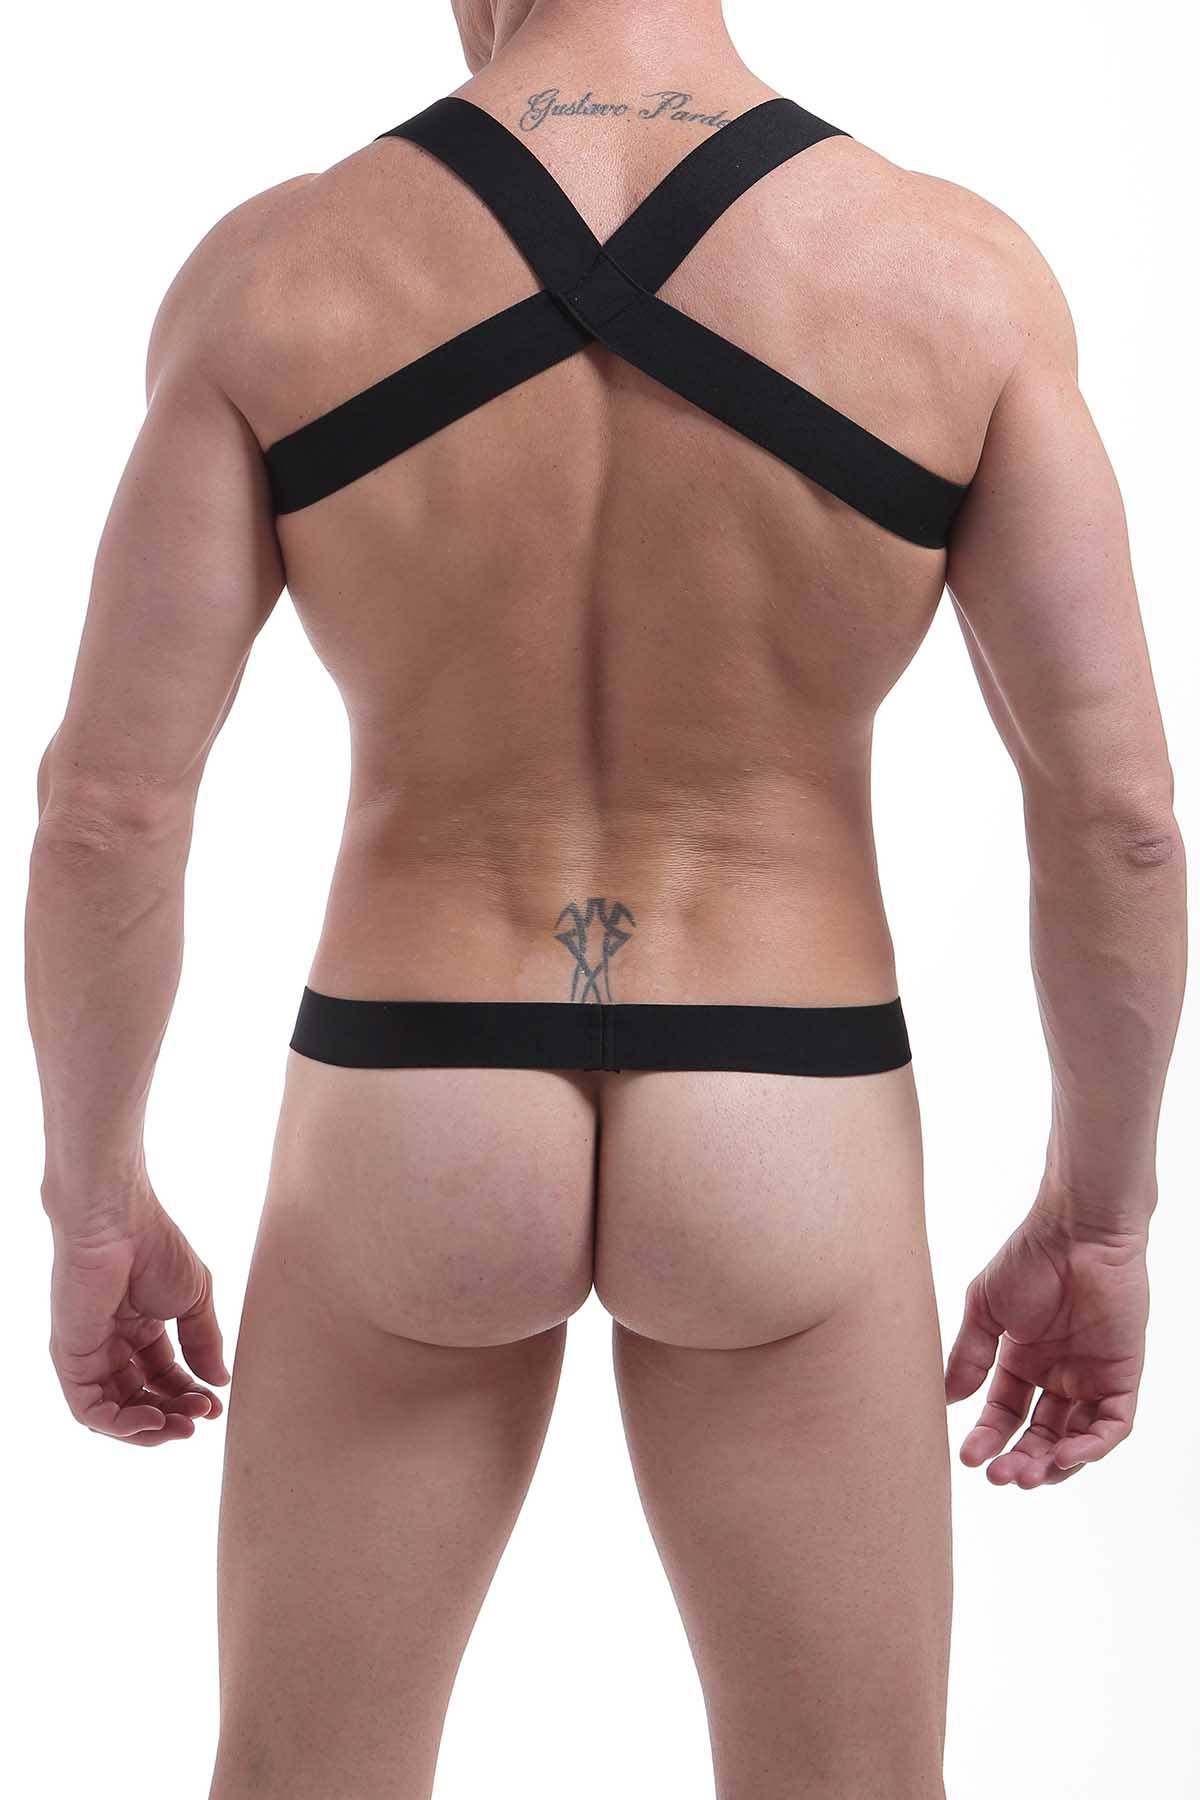 PetitQ Black Harness with C-Ring